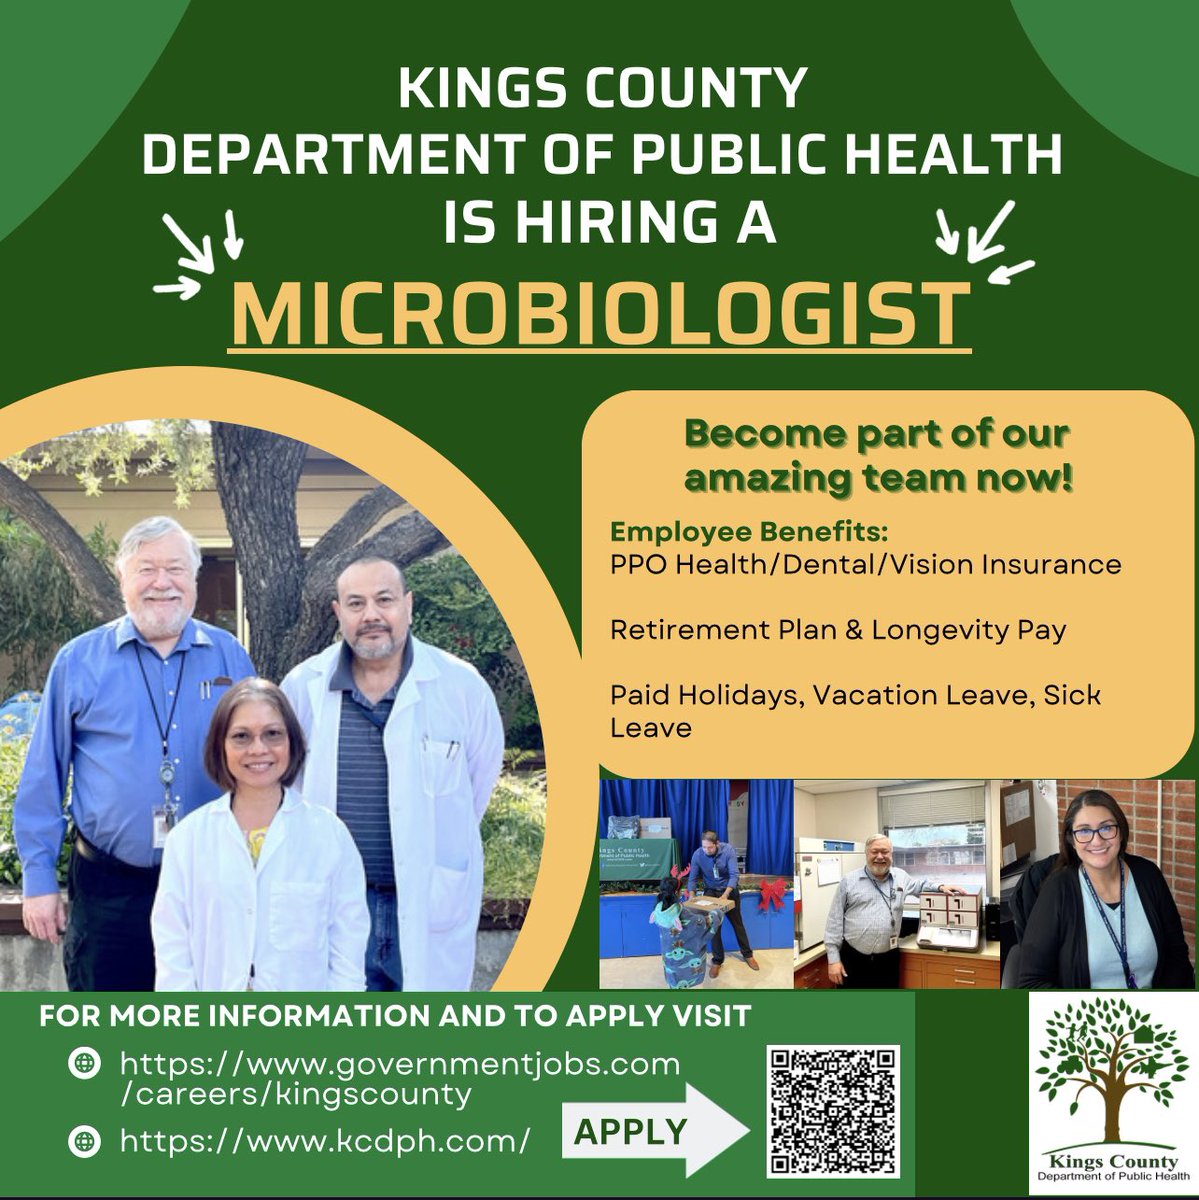 Come work for the Kings County Department of Public Health! 

KCDPH is recruiting a Microbiologist. To apply, visit governmentjobs.com/careers/kingsc…

Employee Benefits:
PPO Health/Dental/Vision Insurance 
Retirement Plan & Longevity Pay
Paid Holidays, Vacation Leave, Sick Leave